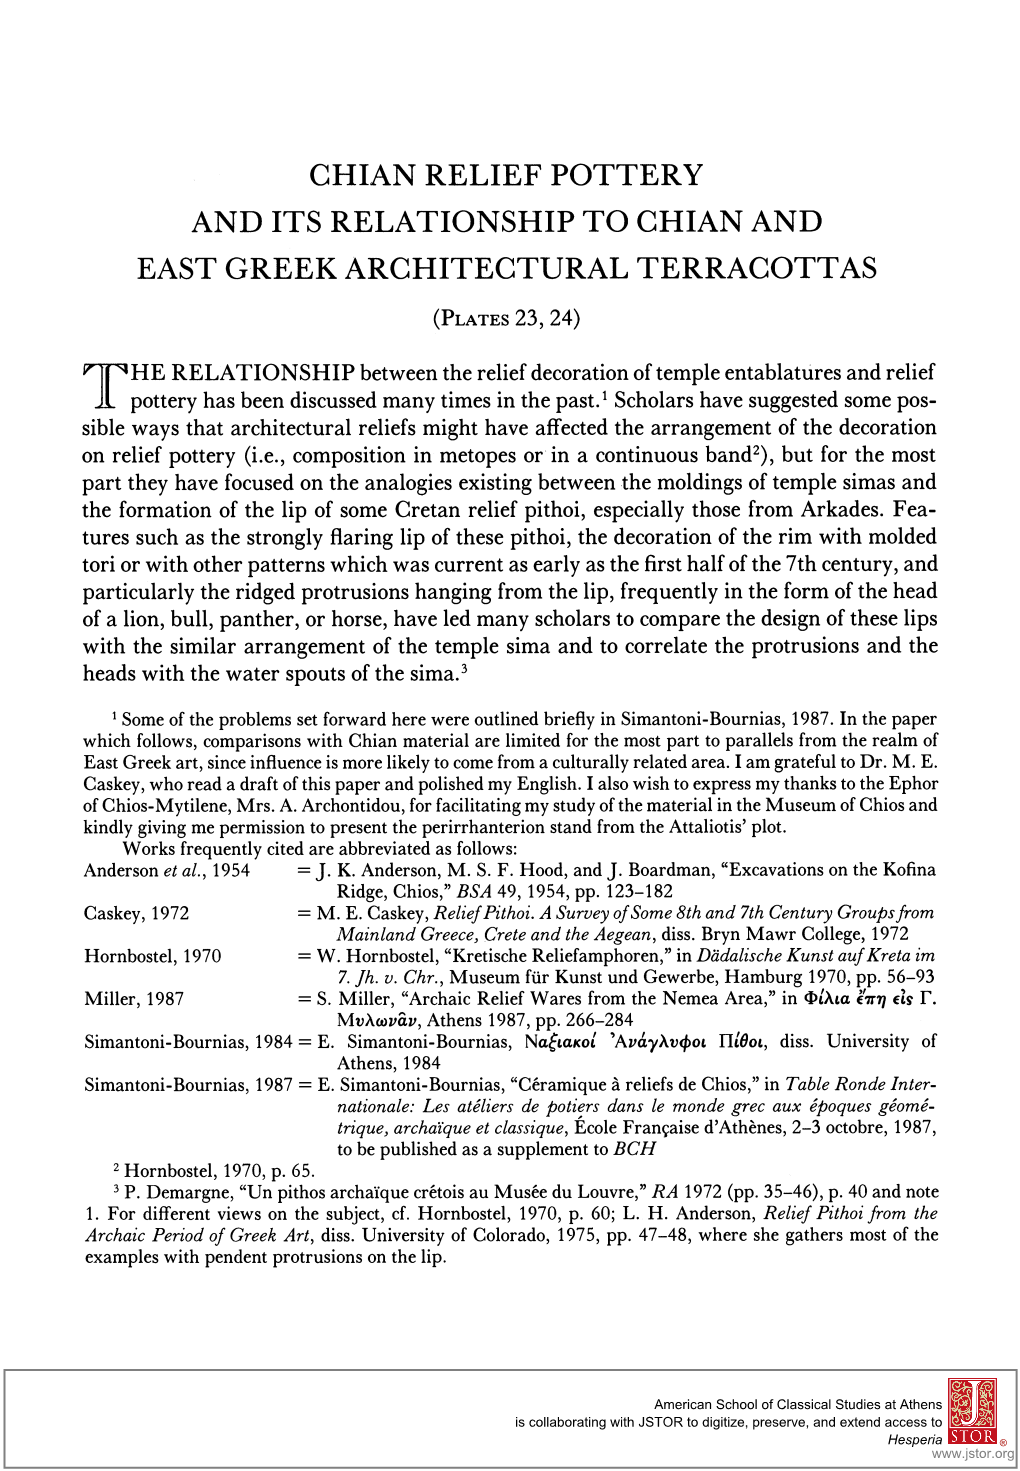 Chian Relief Pottery and Its Relationship to Chian and East Greek Architectural Terracottas